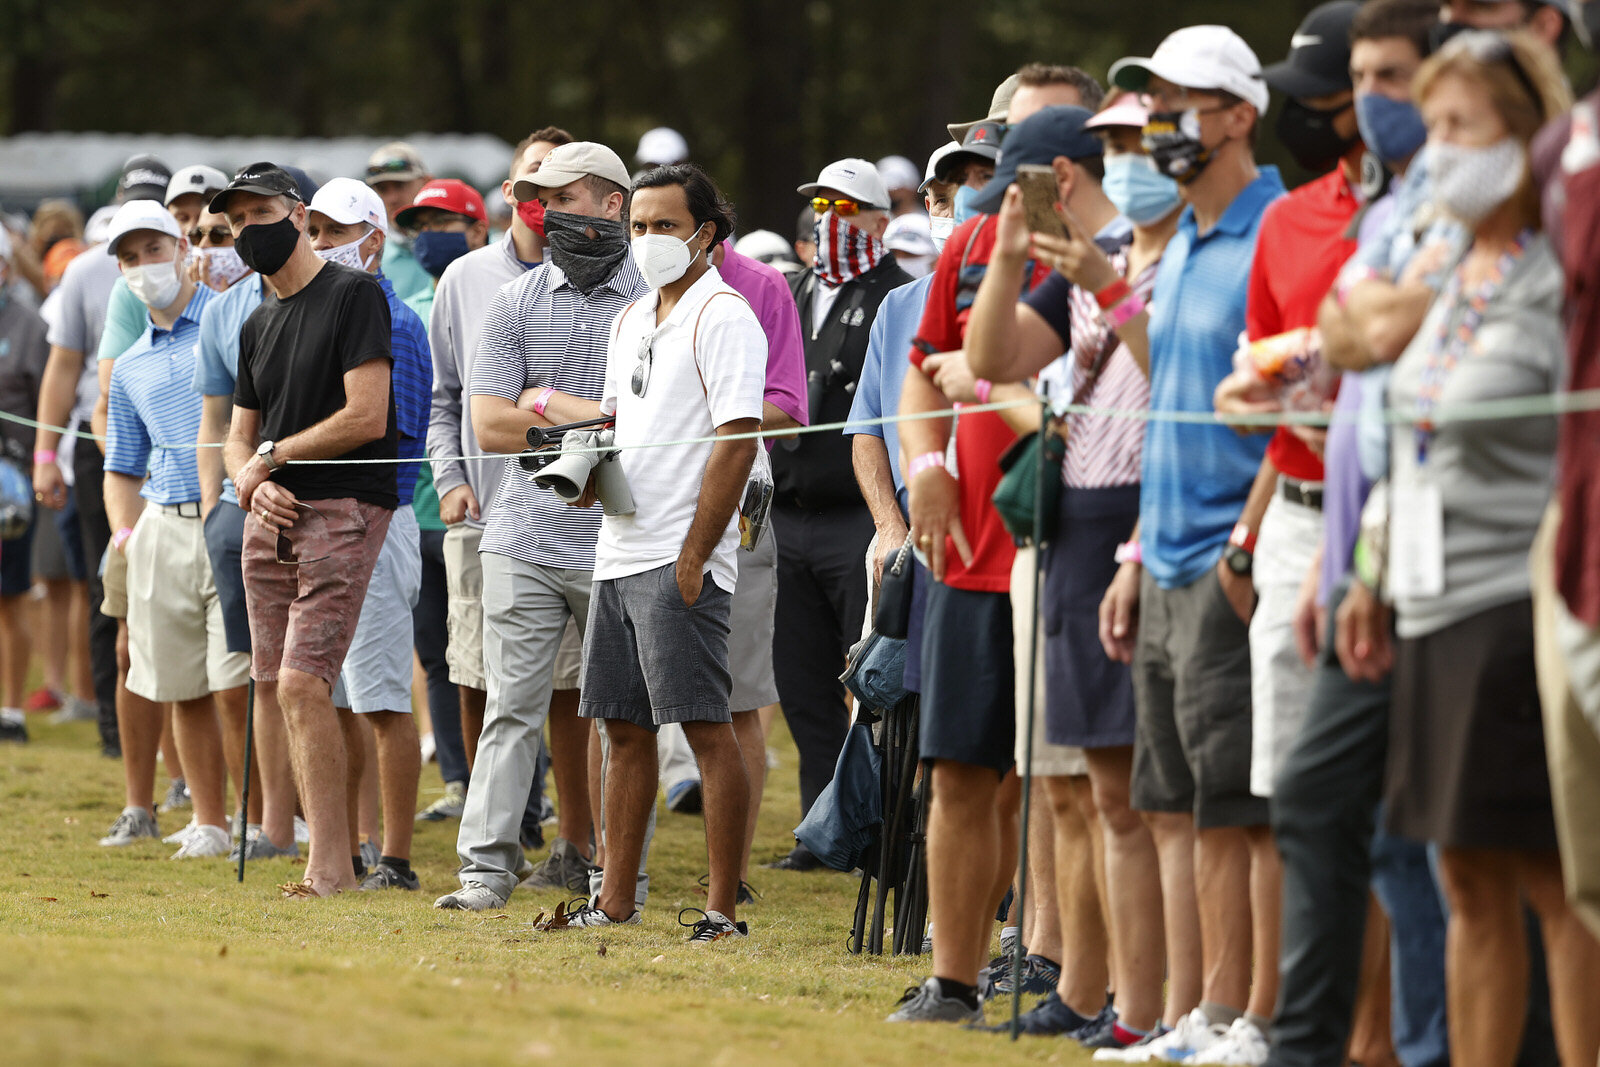  HOUSTON, TEXAS - NOVEMBER 05: Fans, wearing masks, watch action on the ninth green during the first round of the Vivint Houston Open at Memorial Park Golf Course on November 05, 2020 in Houston, Texas. The Vivint Houston Open is the first PGA Tour e